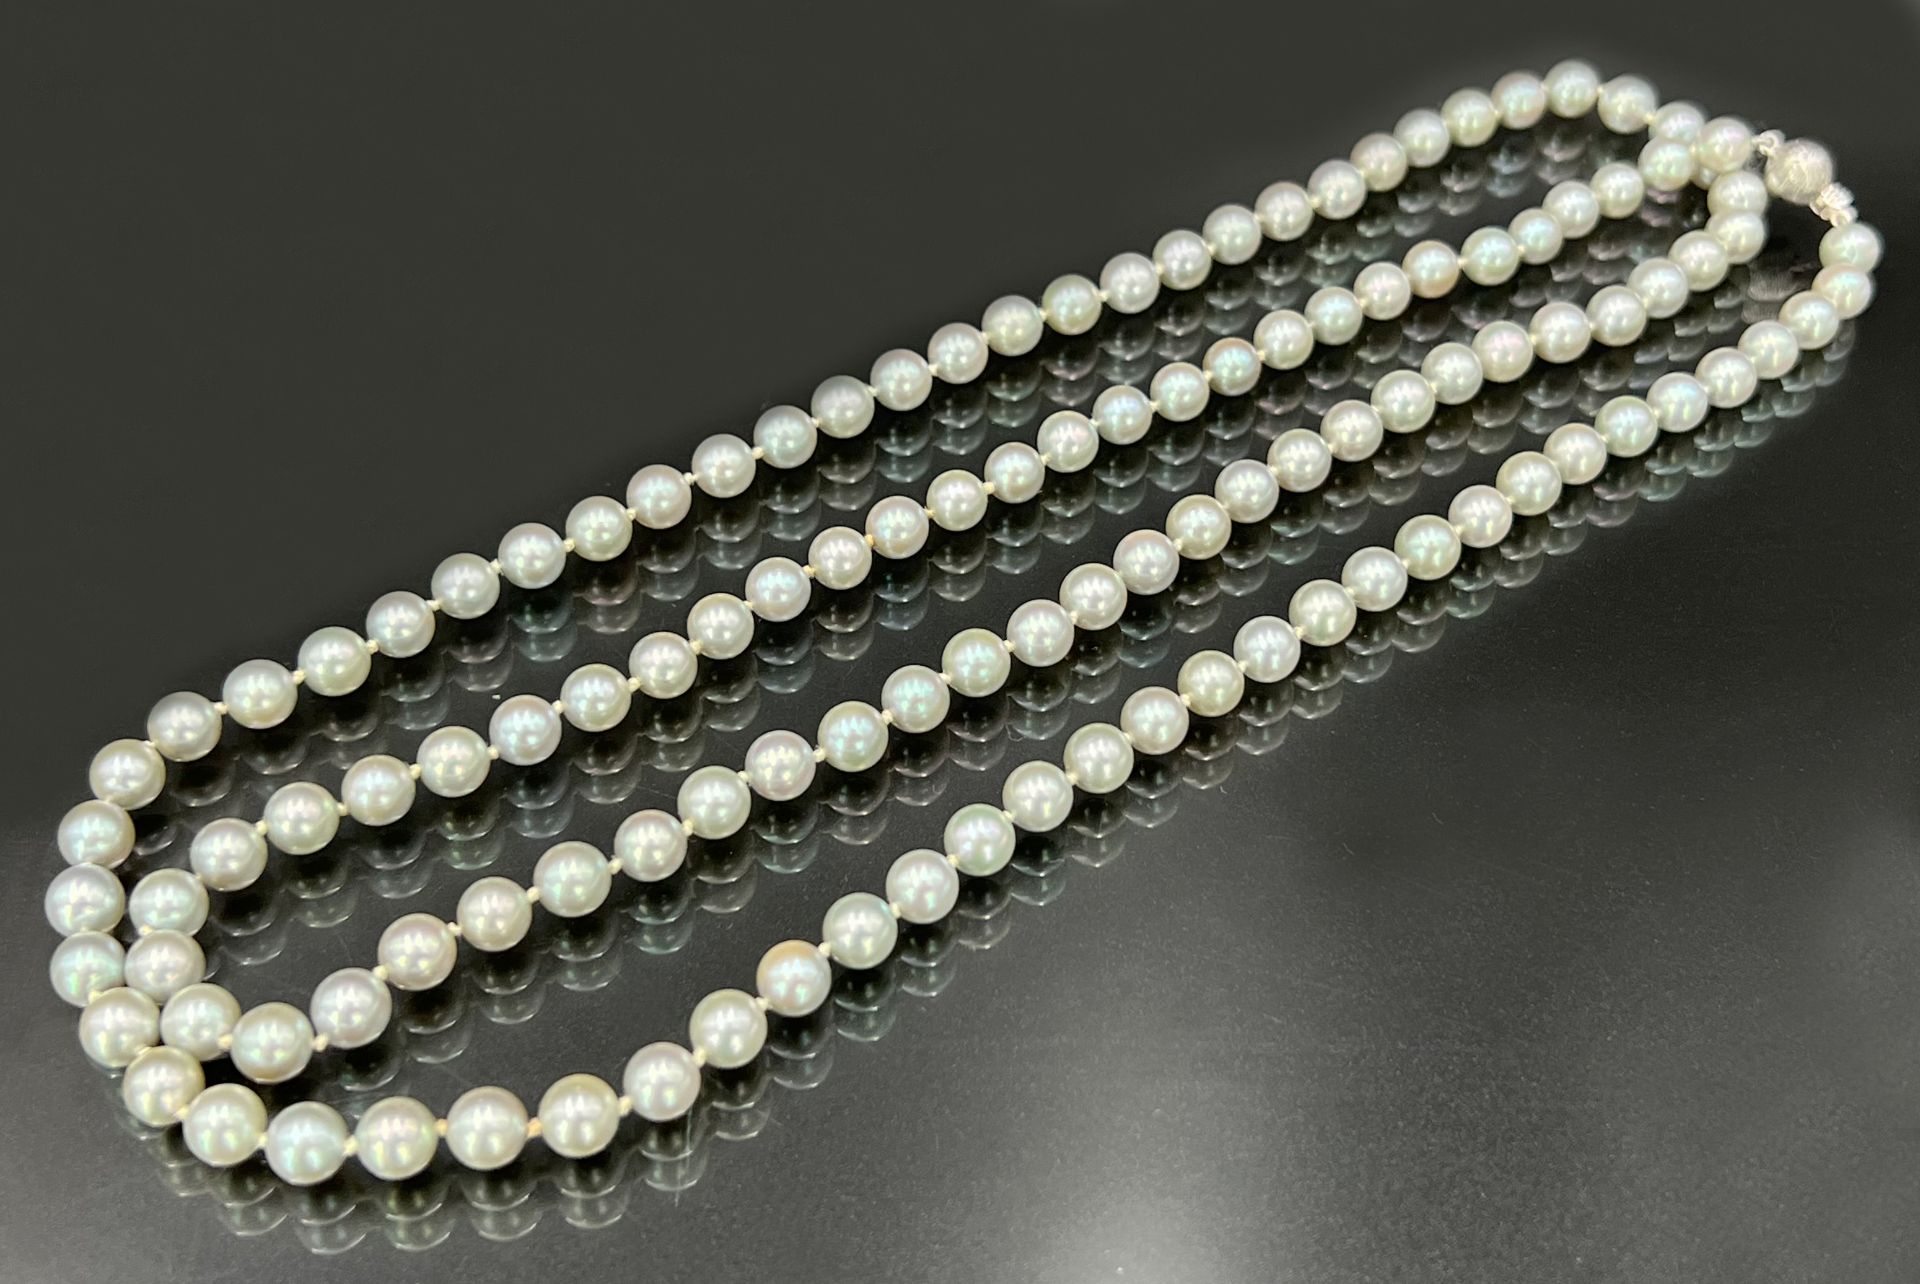 Pearl necklace with a small 585 gold clasp.